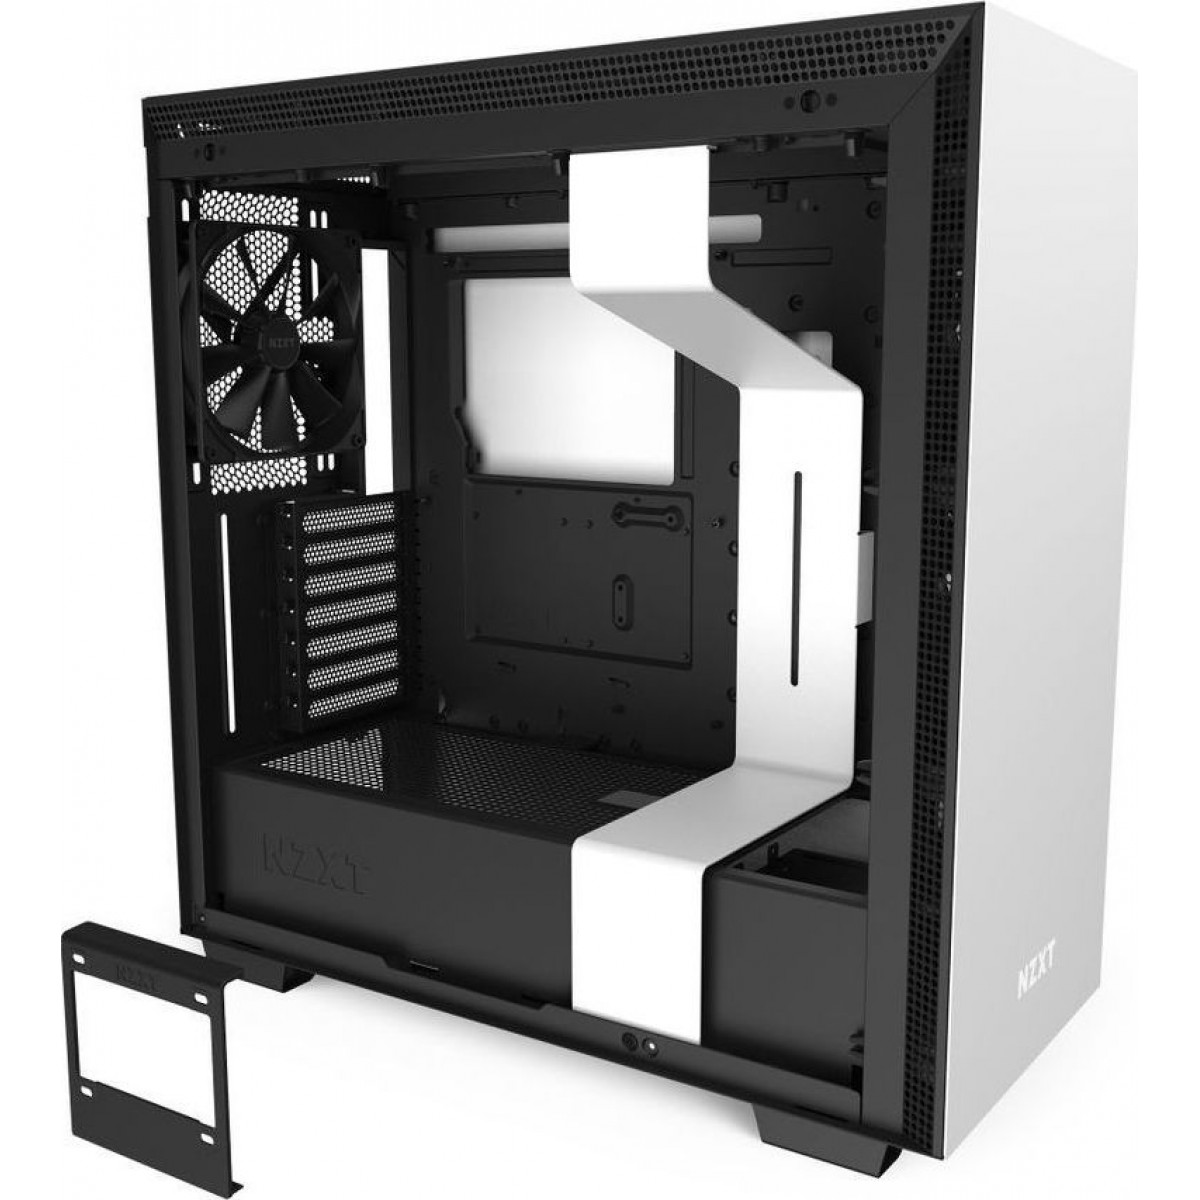 CASE NZXT H710 TOWER TEMPERED GLASS 272MM EATX WHITE CA-H710B-W1